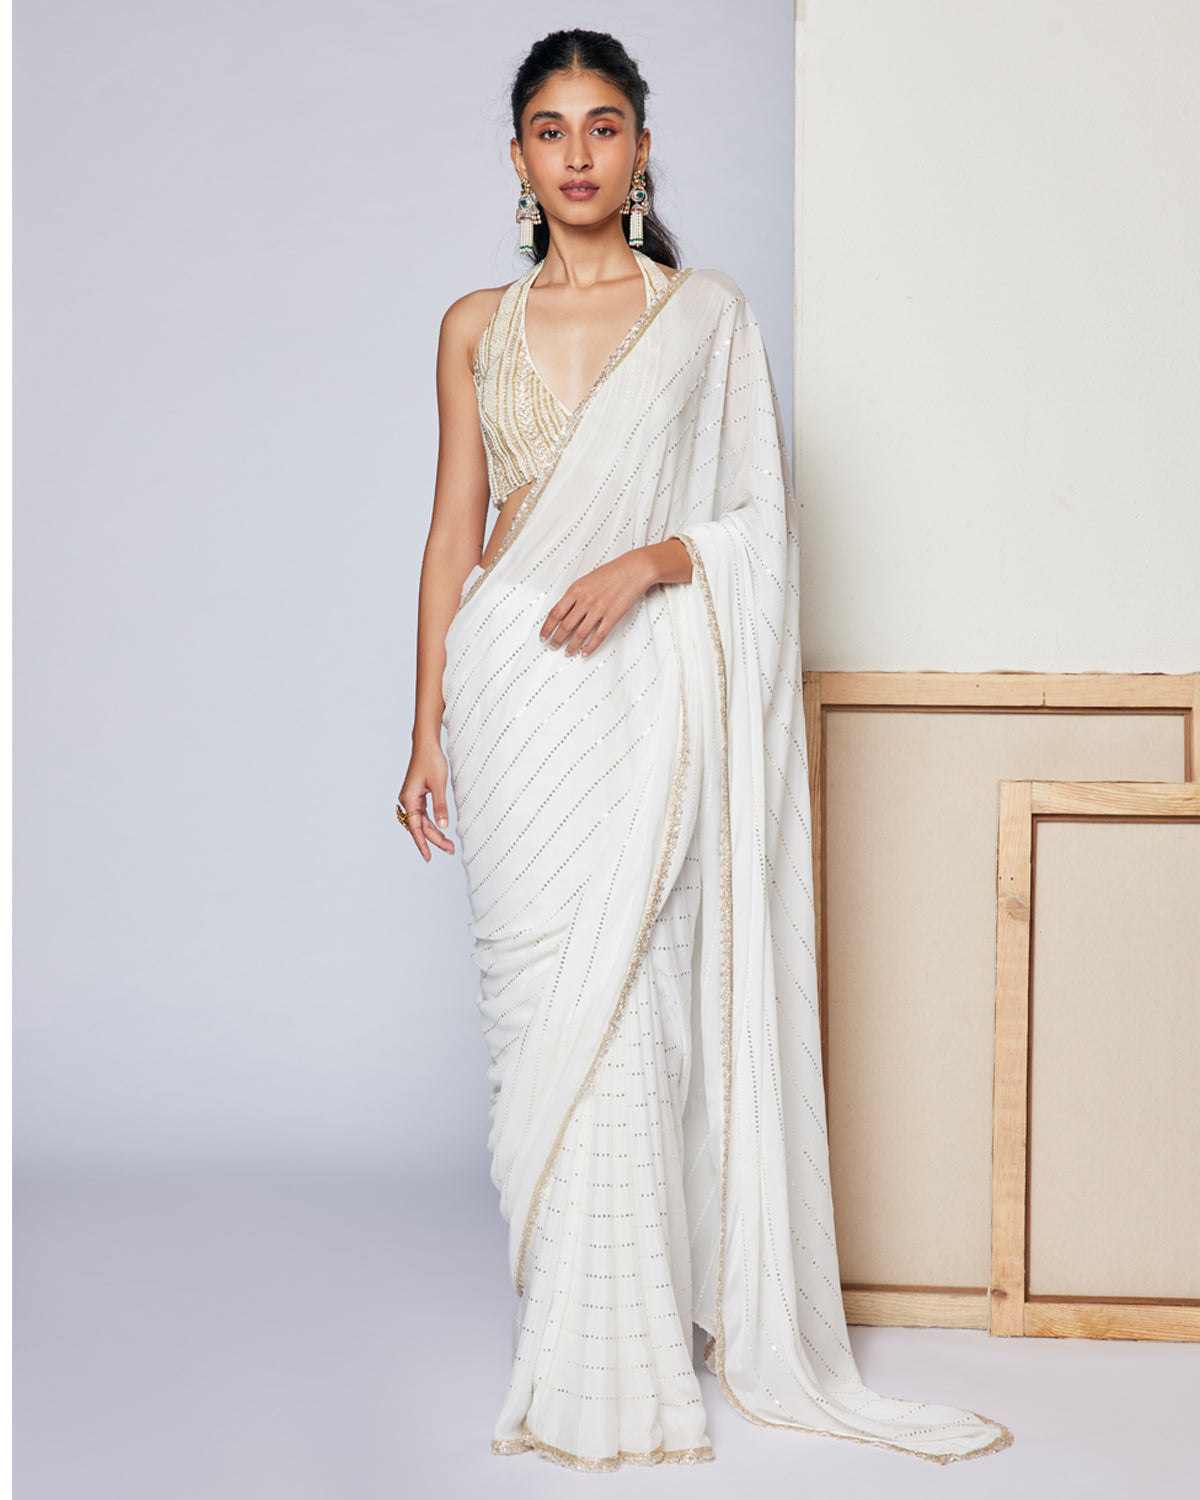 Shop Bralette Blouse Saree for Women Online from India's Luxury Designers  2024